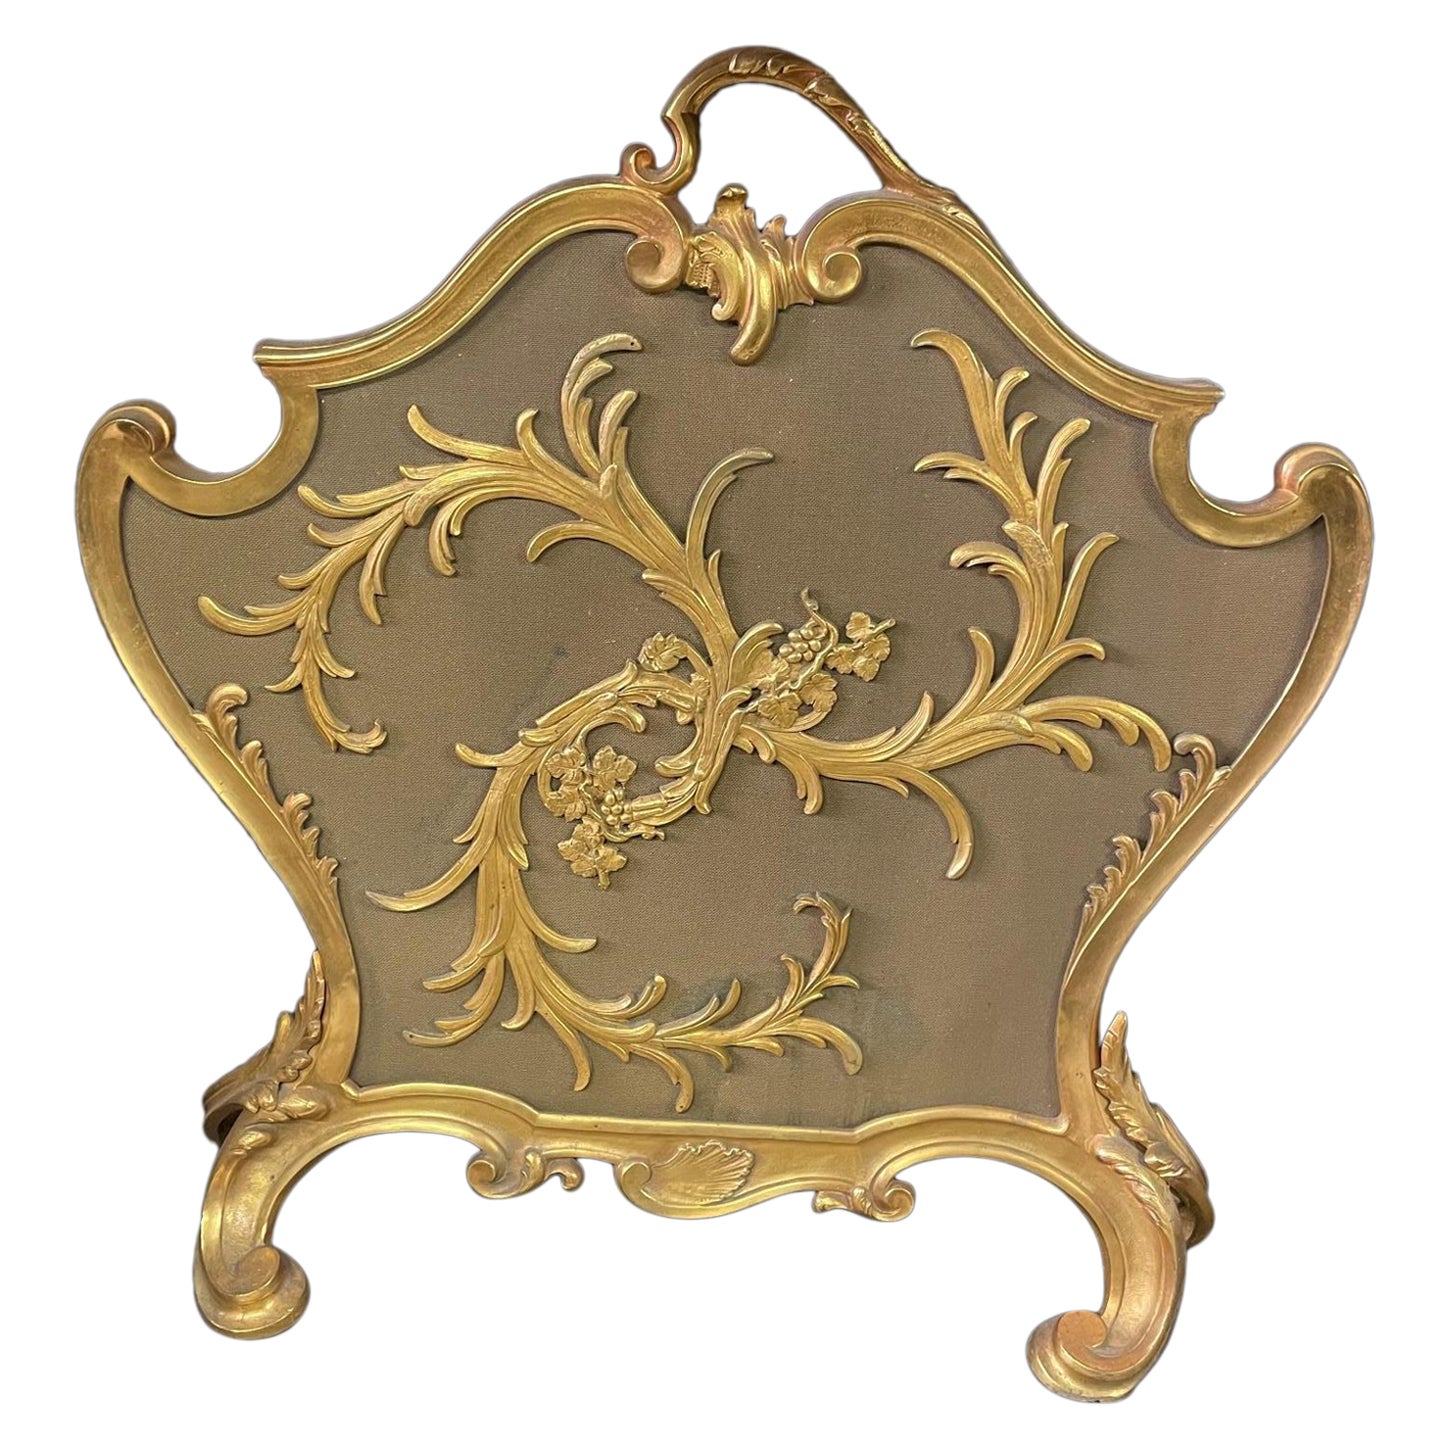 Early 20th Century Fire Screen in the Rococo Style